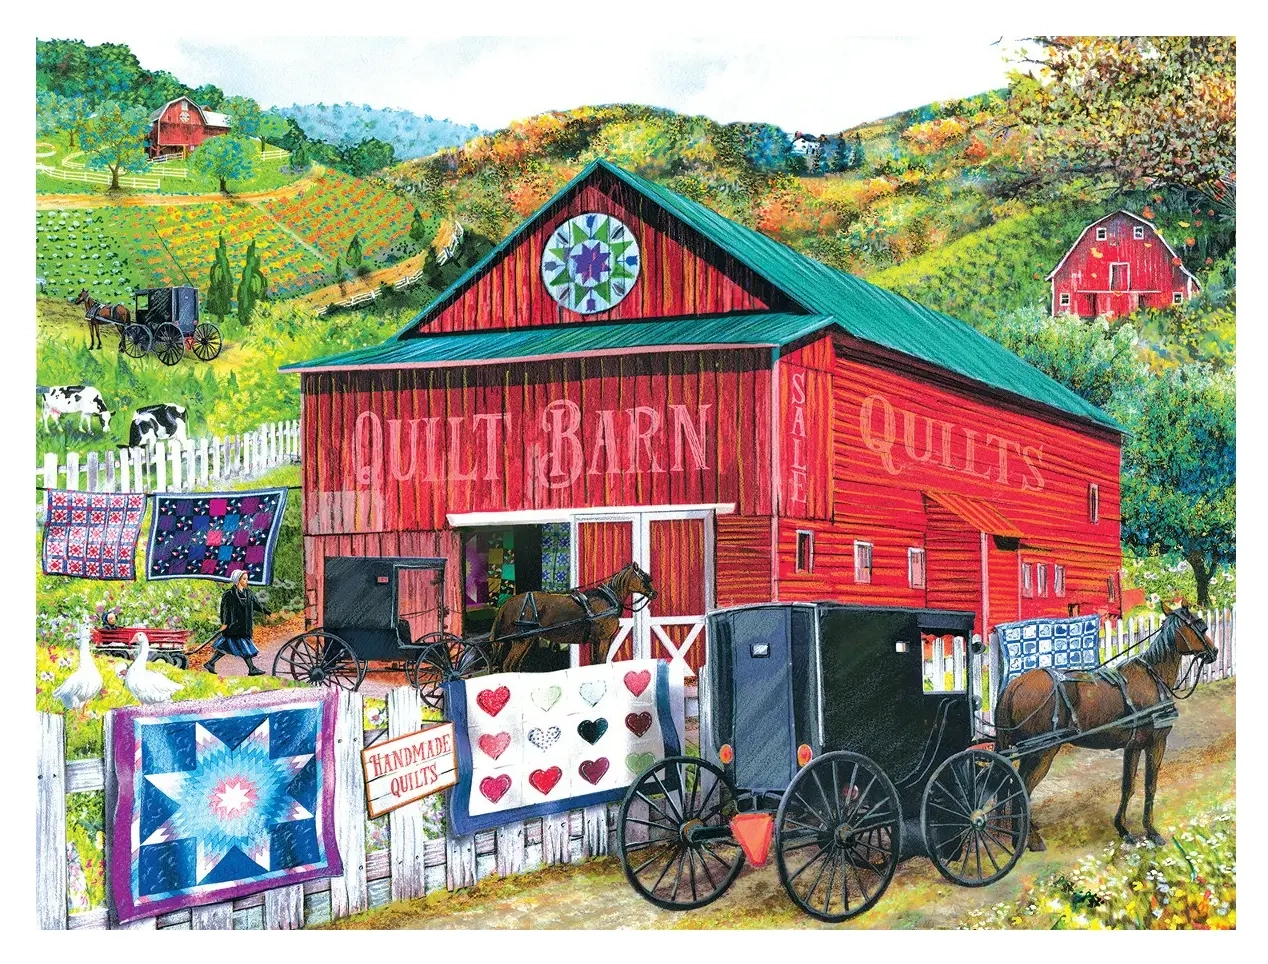 Stopping at the Quilt Barn - Tom Wood